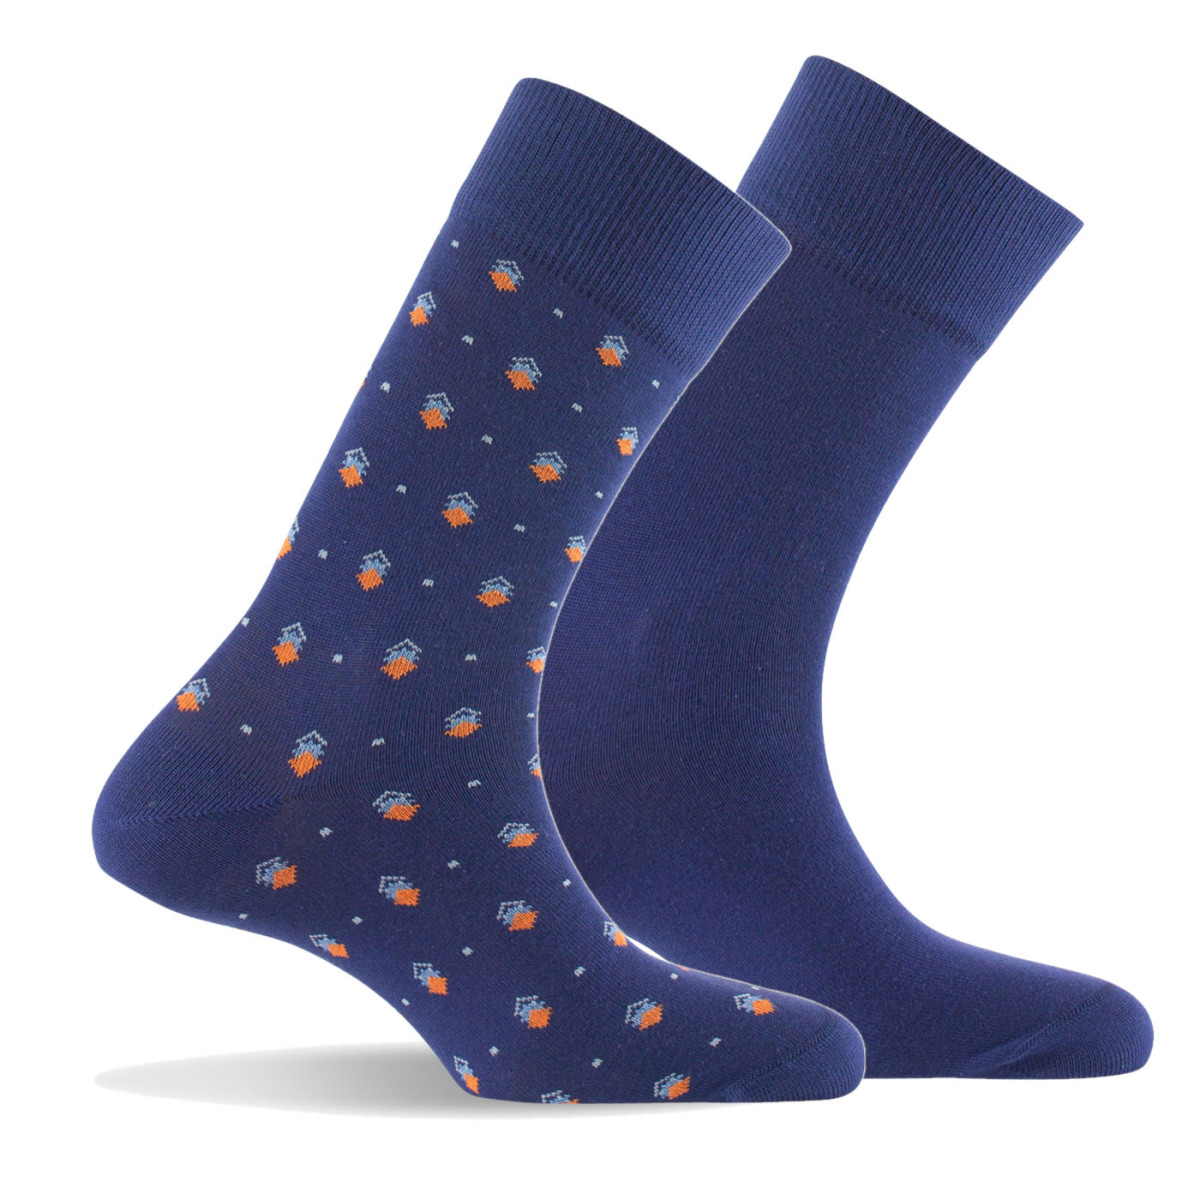 Soldes Chaussettes fantaisie grande taille homme - taille 43/46